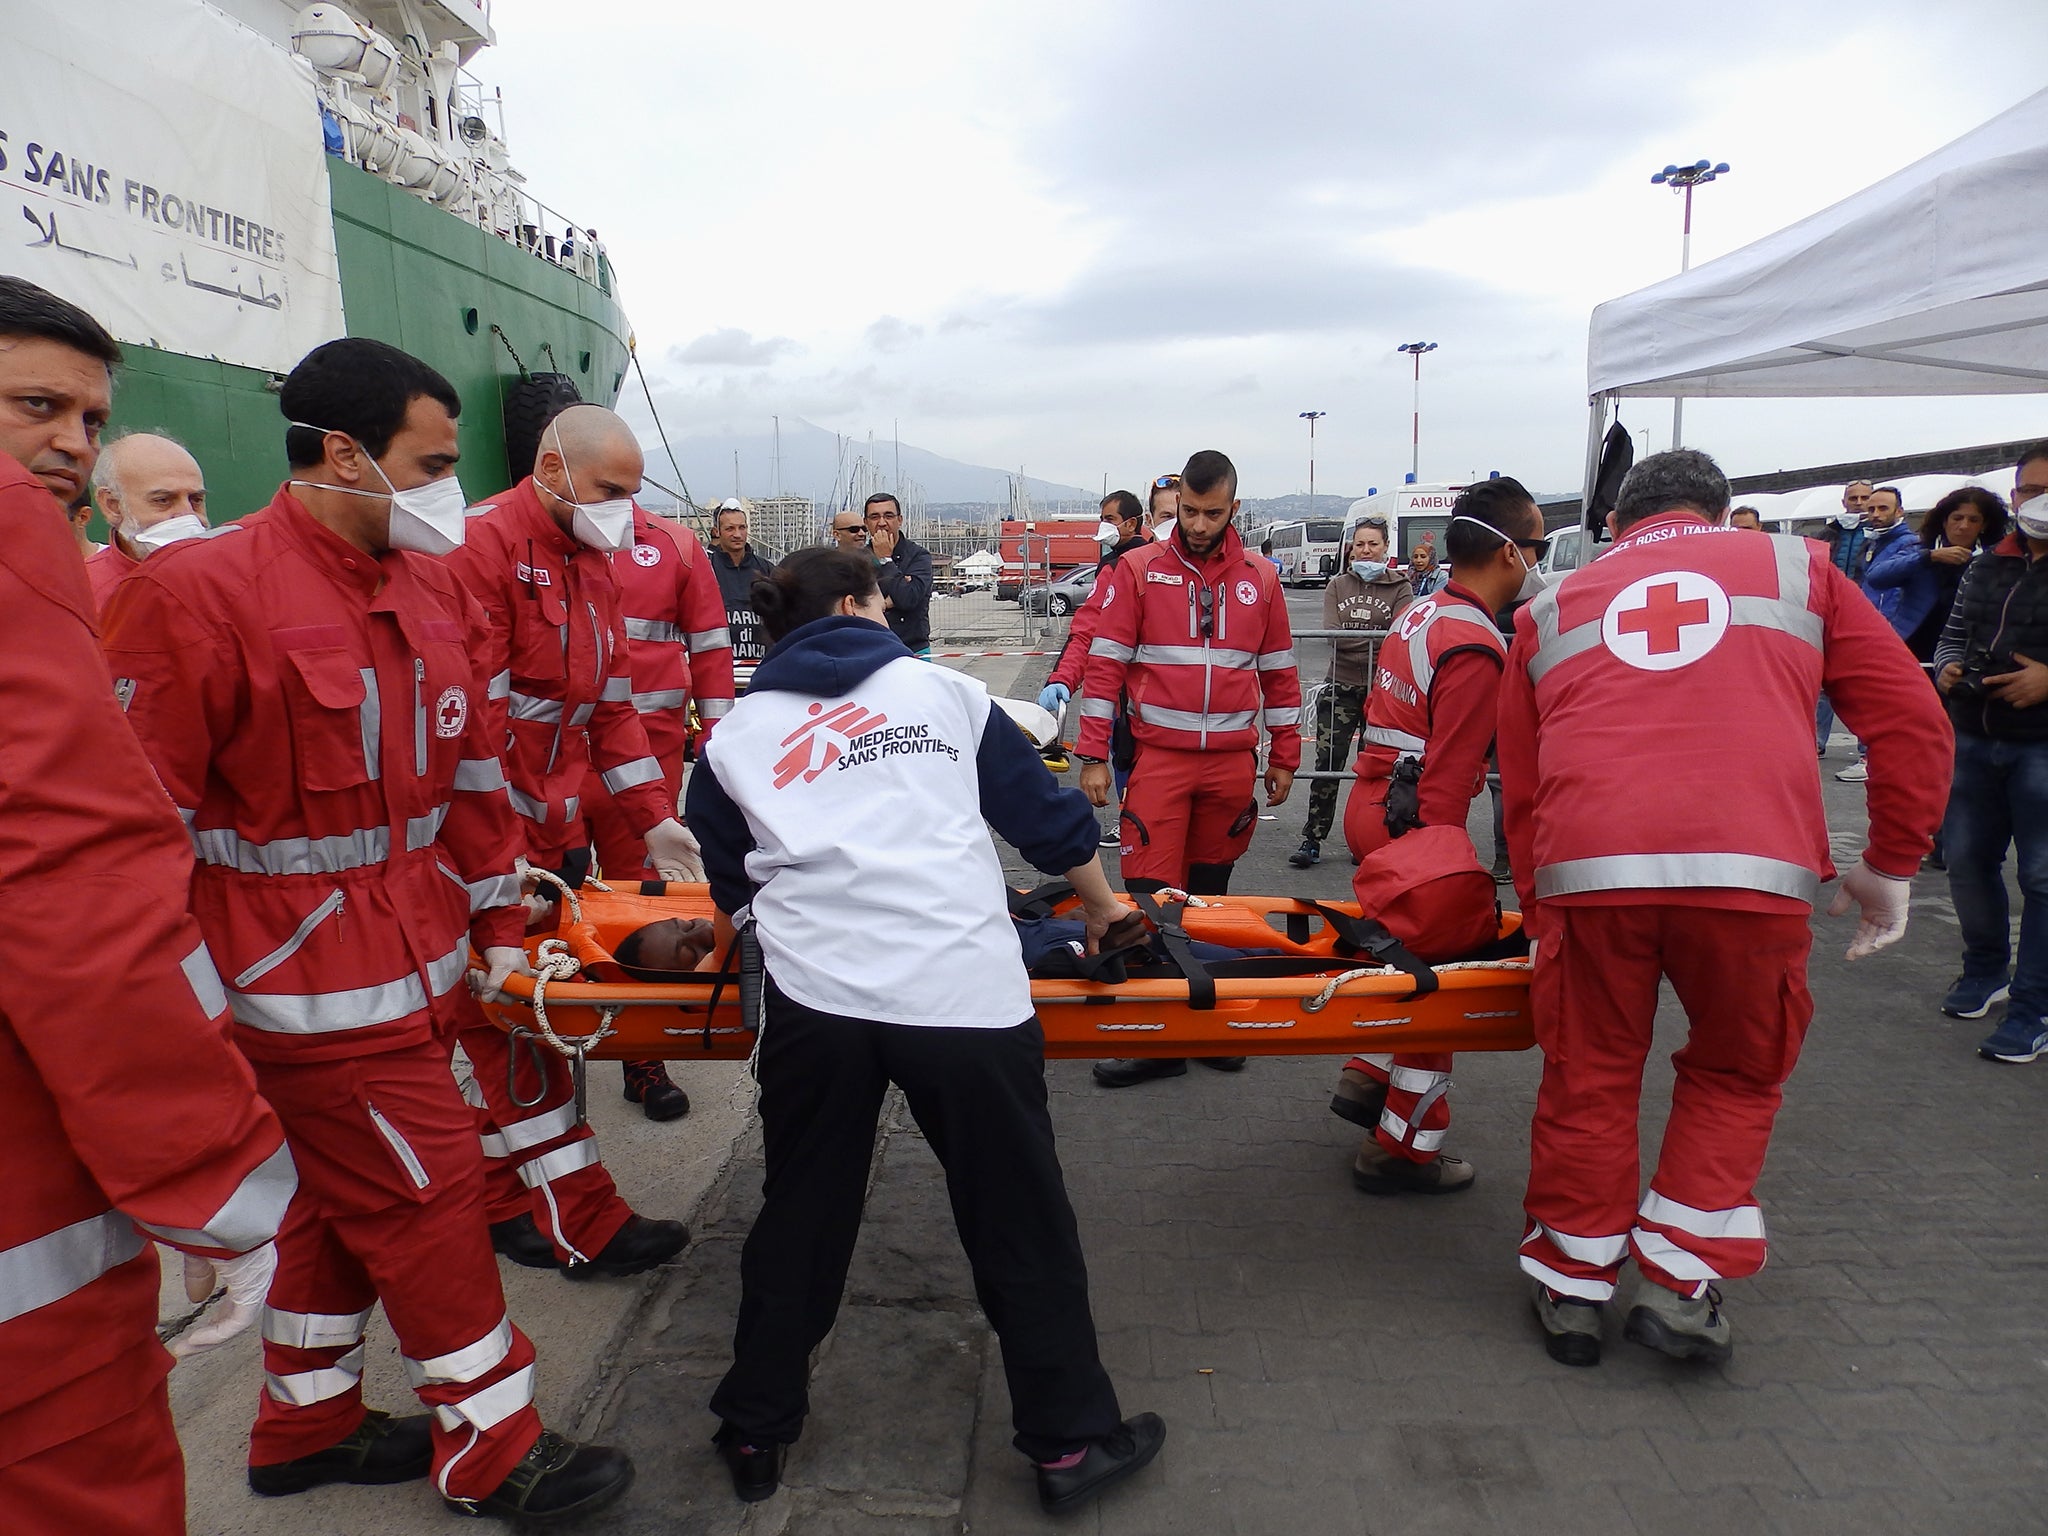 A man being taken to hospital from MSF rescue ship the Bourbon Argos in Catania, Sicily